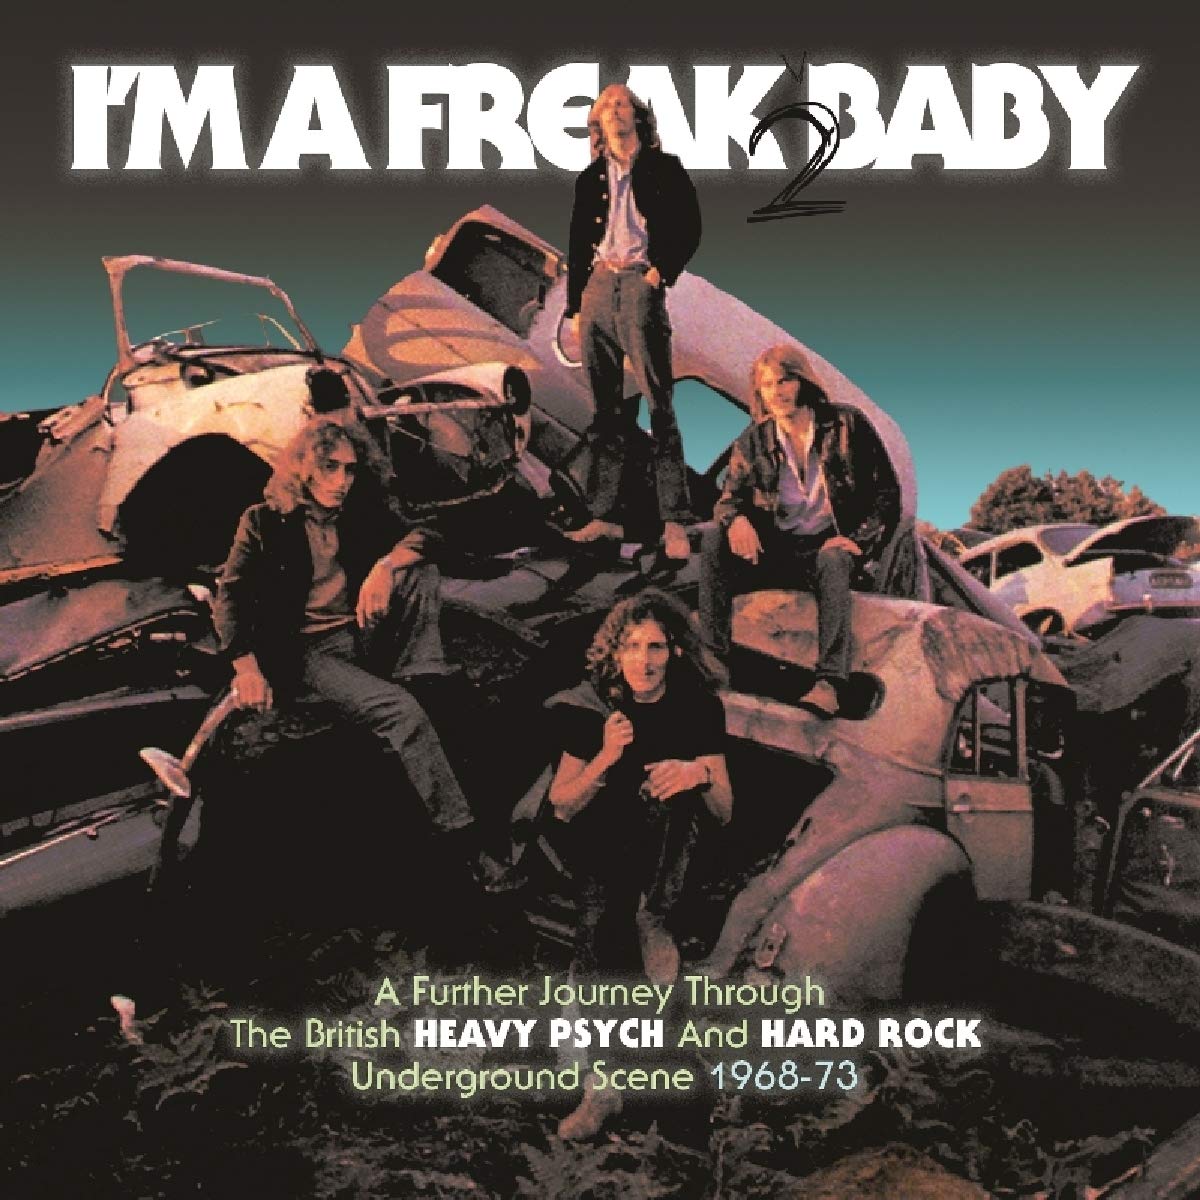 V.A. (HARD ROCK) / I'M A FREAK 2 BABY - A FURTHER JOURNEY THROUGH THE BRITISH HEAVY PSYCH AND HARD ROCK UNDERGROUND SCENE 1968-73 (3CD BOX)